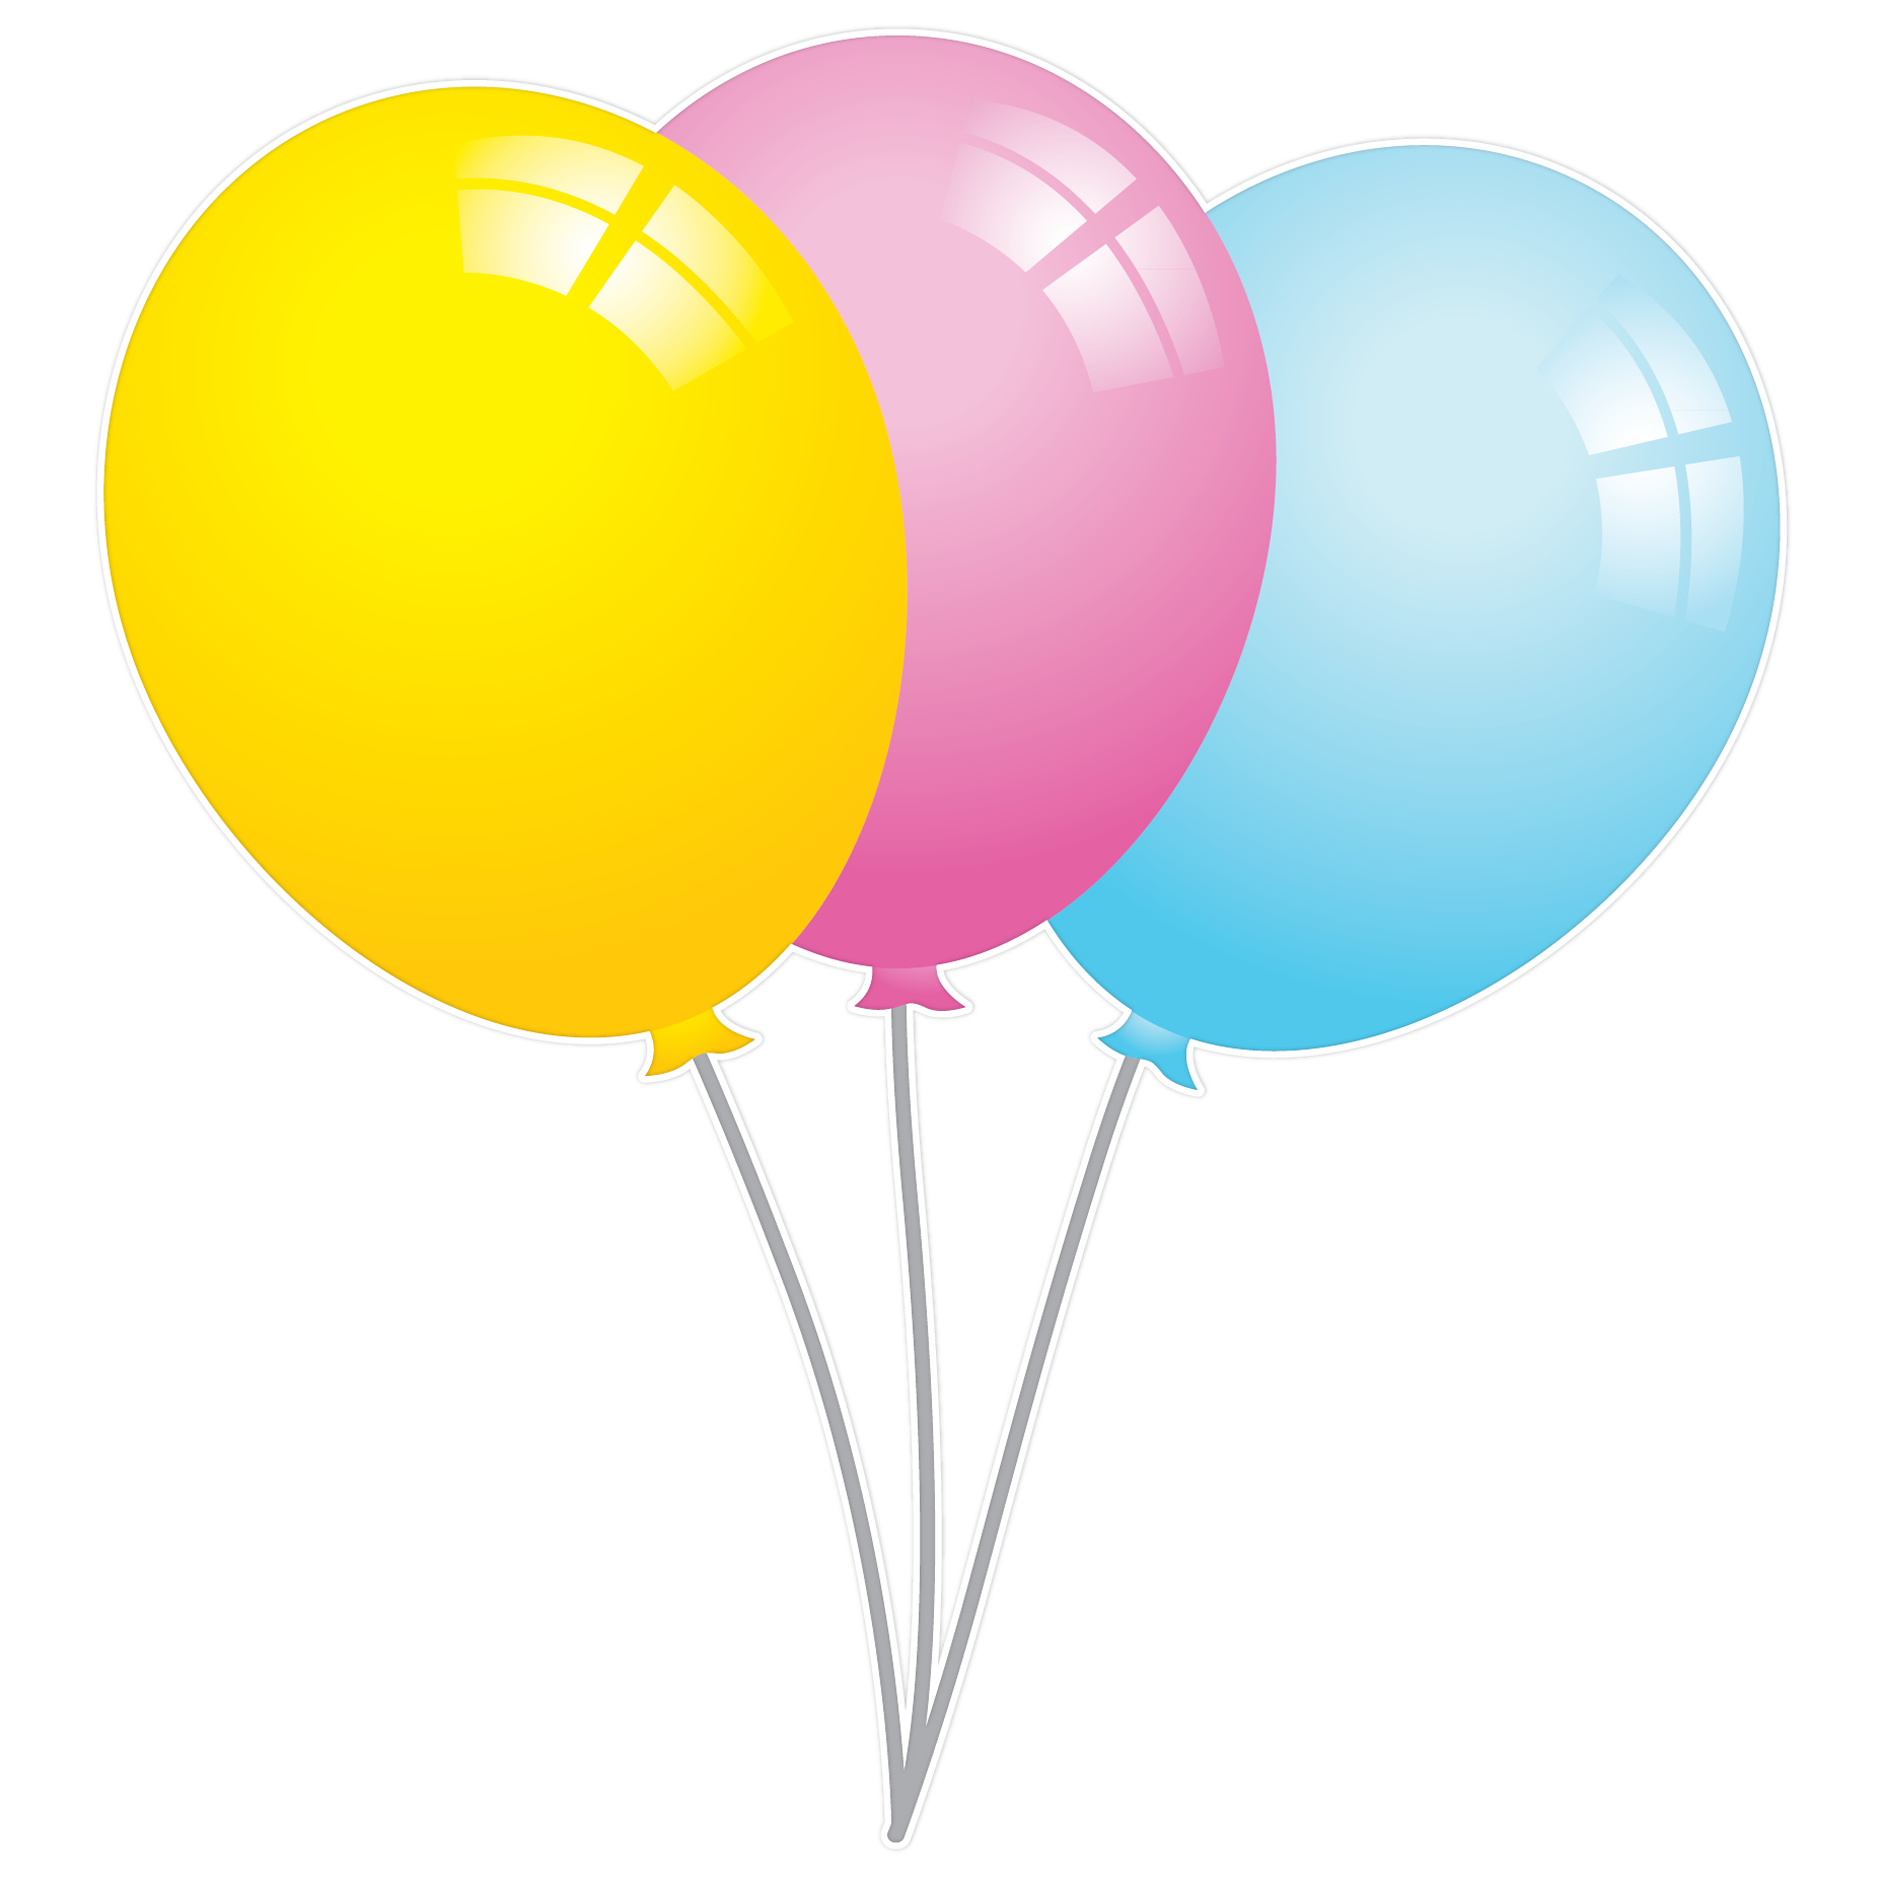 Birthday Balloons Png - ClipArt Best